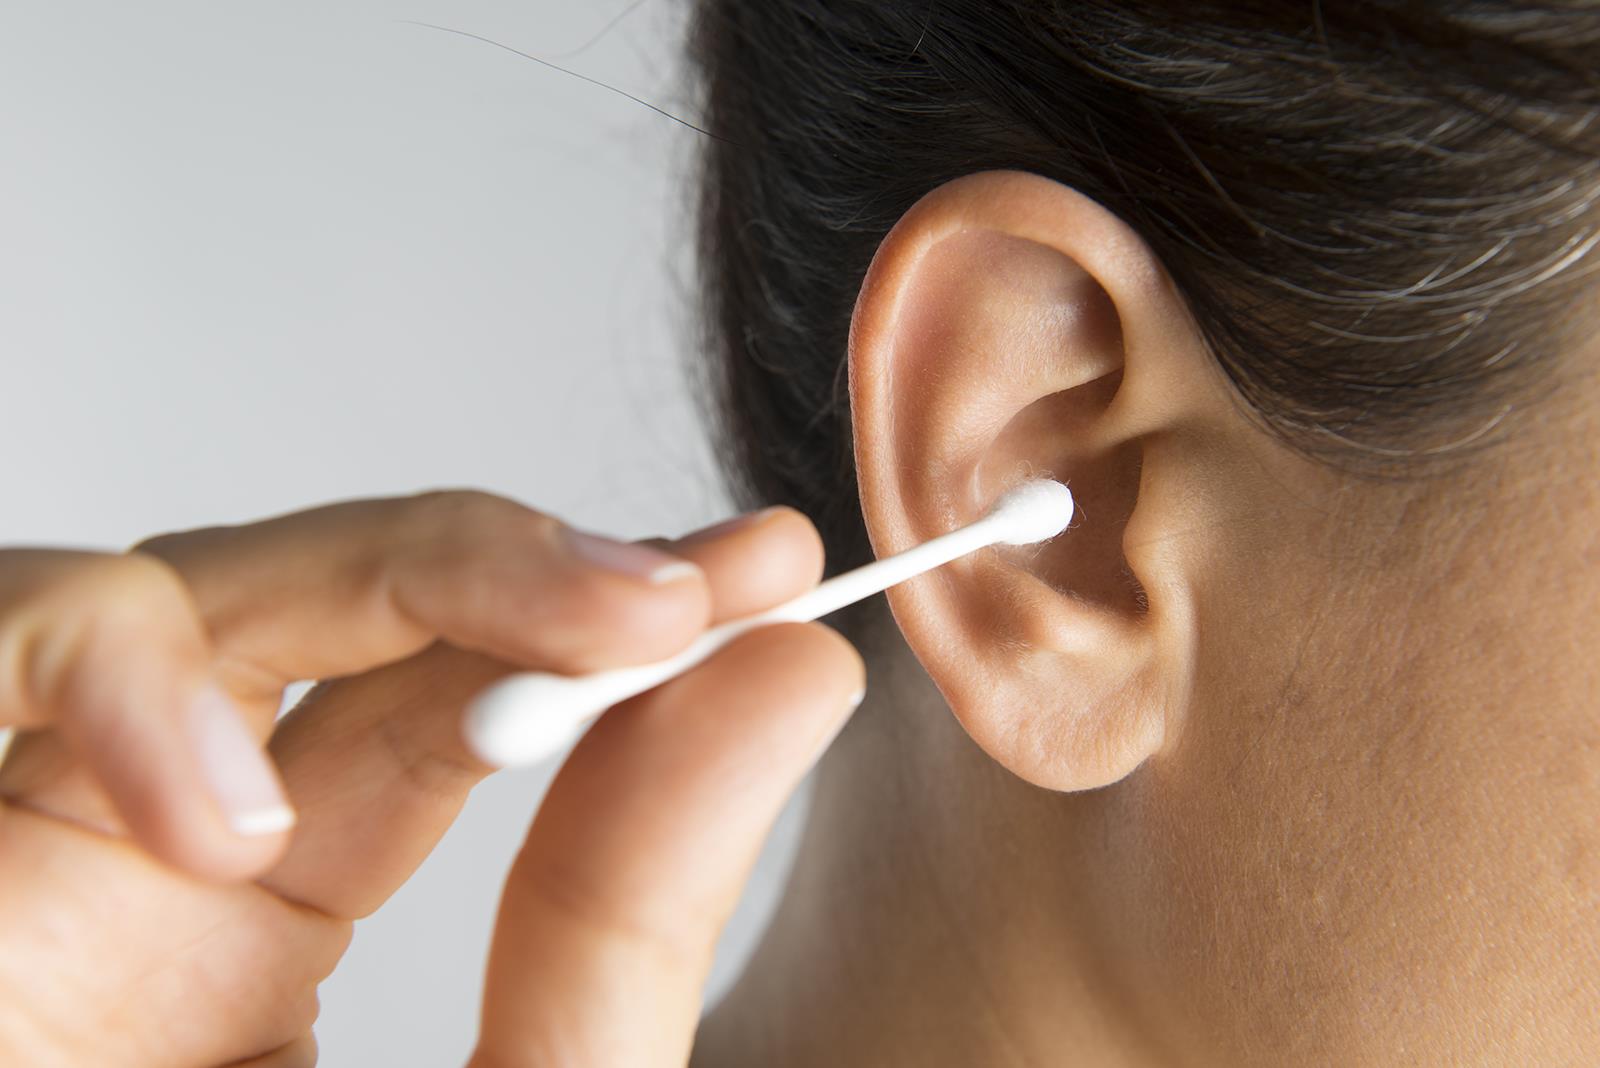 How to Properly Take Care of Earwax